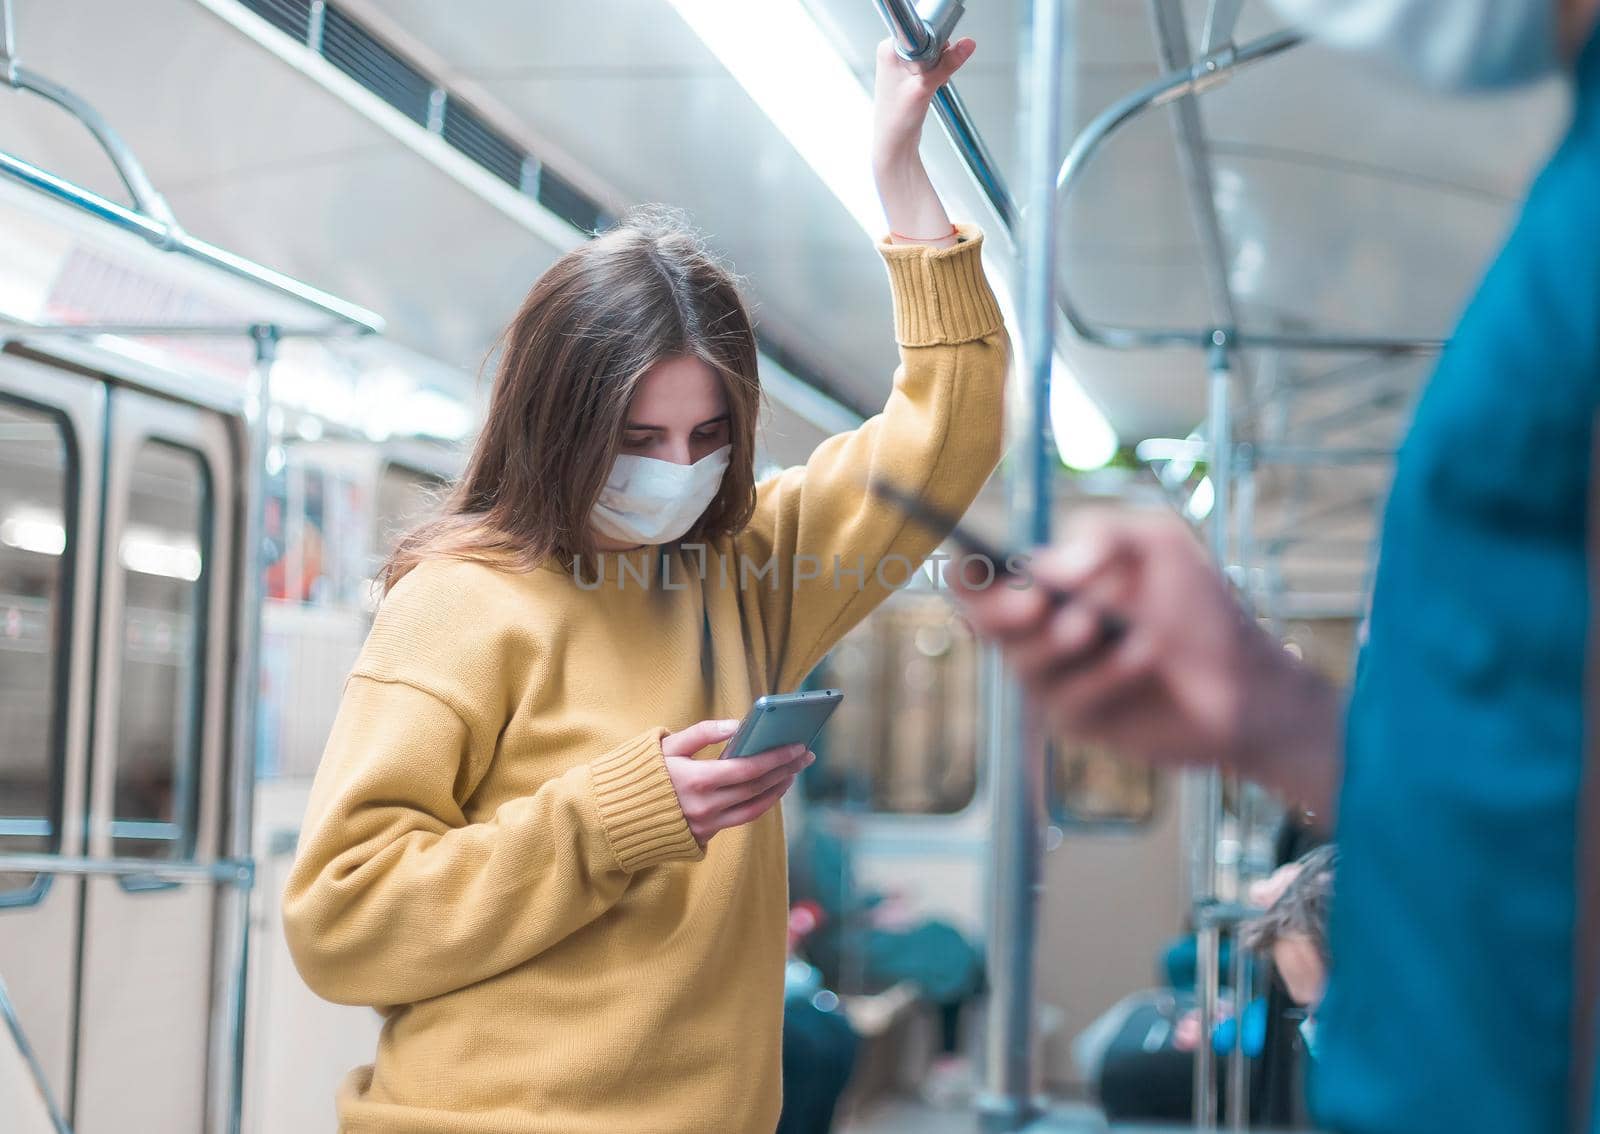 people with smartphones standing in a subway car. coronavirus in the city